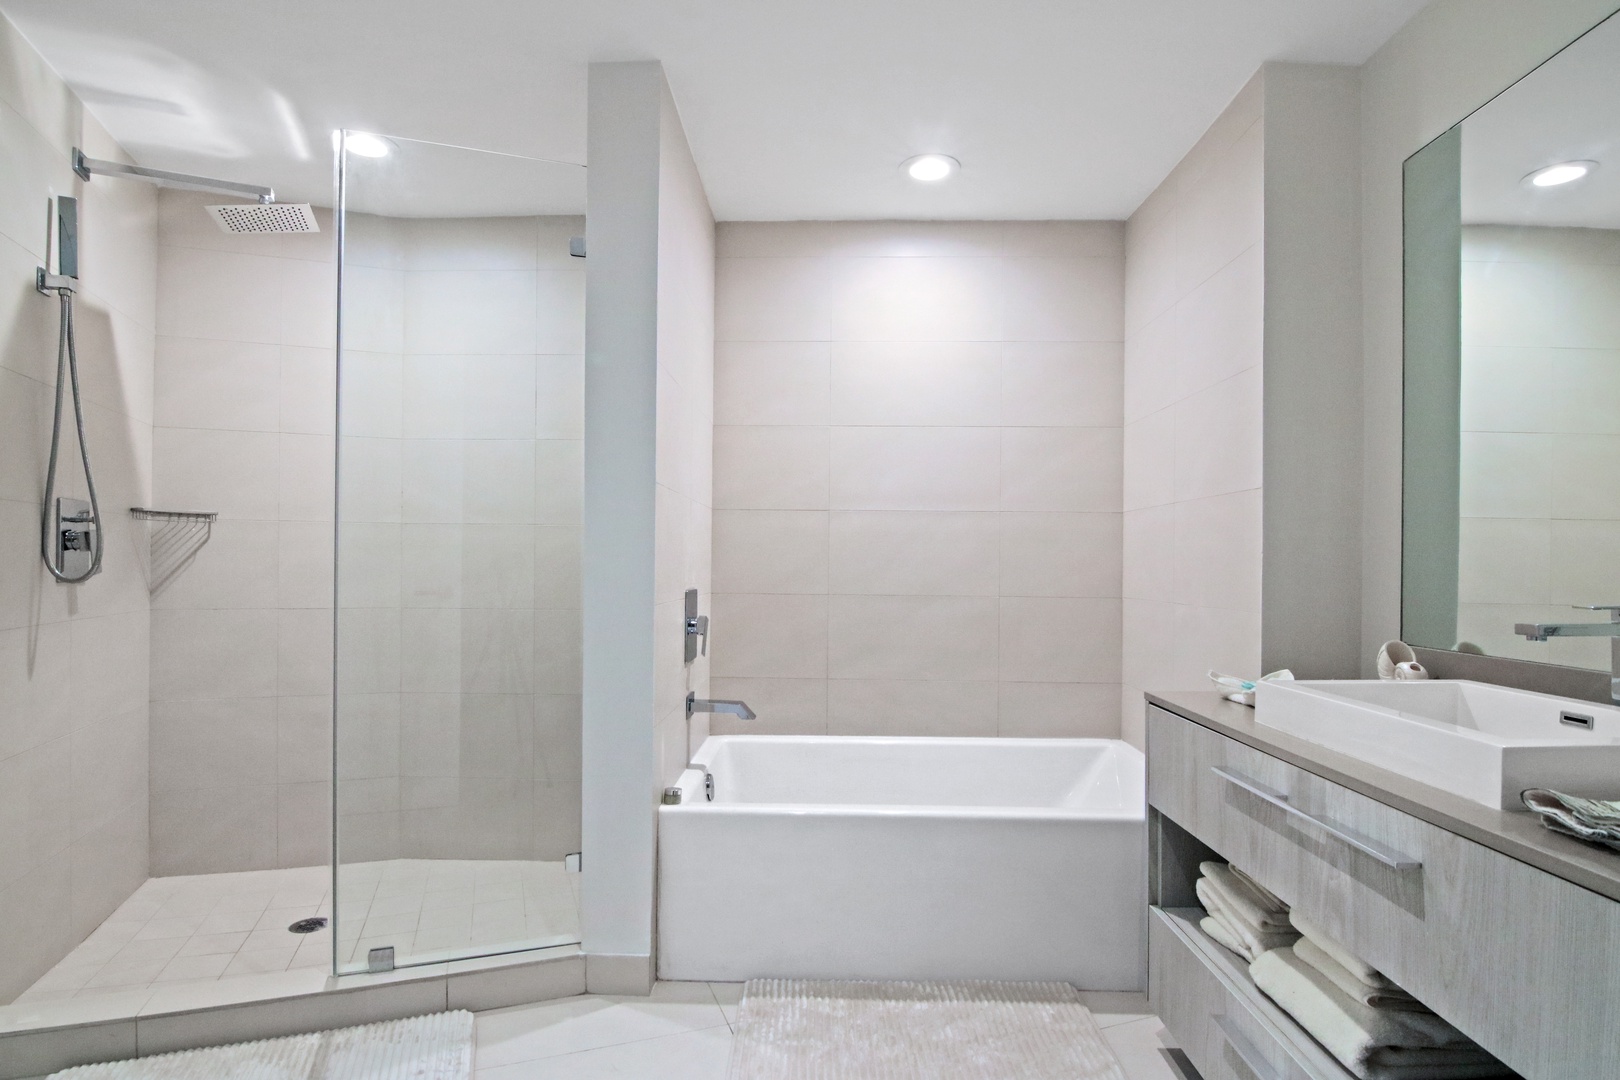 The first king en suite offers a single vanity, glass shower, & soaking tub